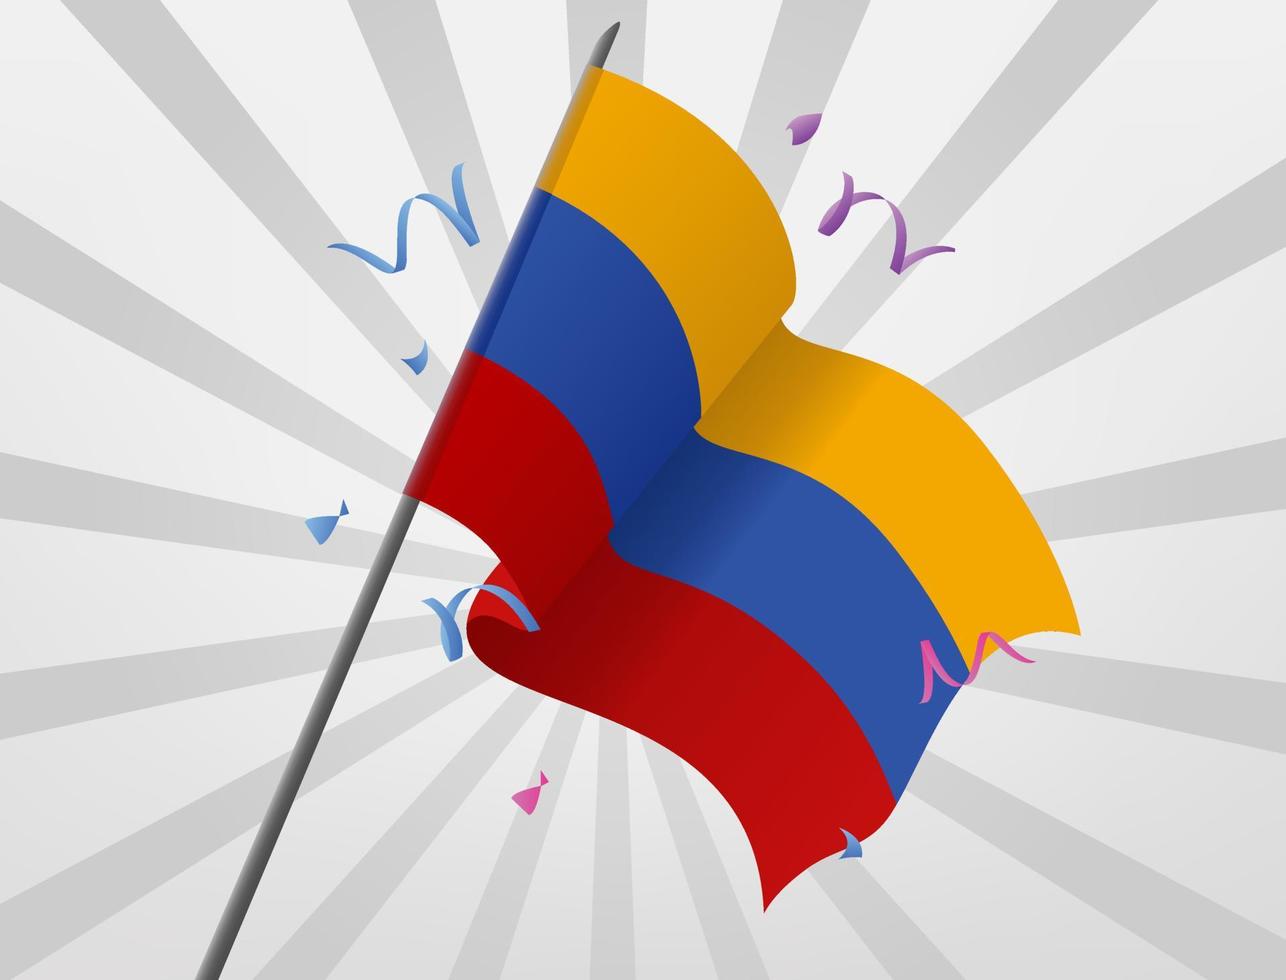 The celebration flag of the country of Colombia is flying at high altitudes vector